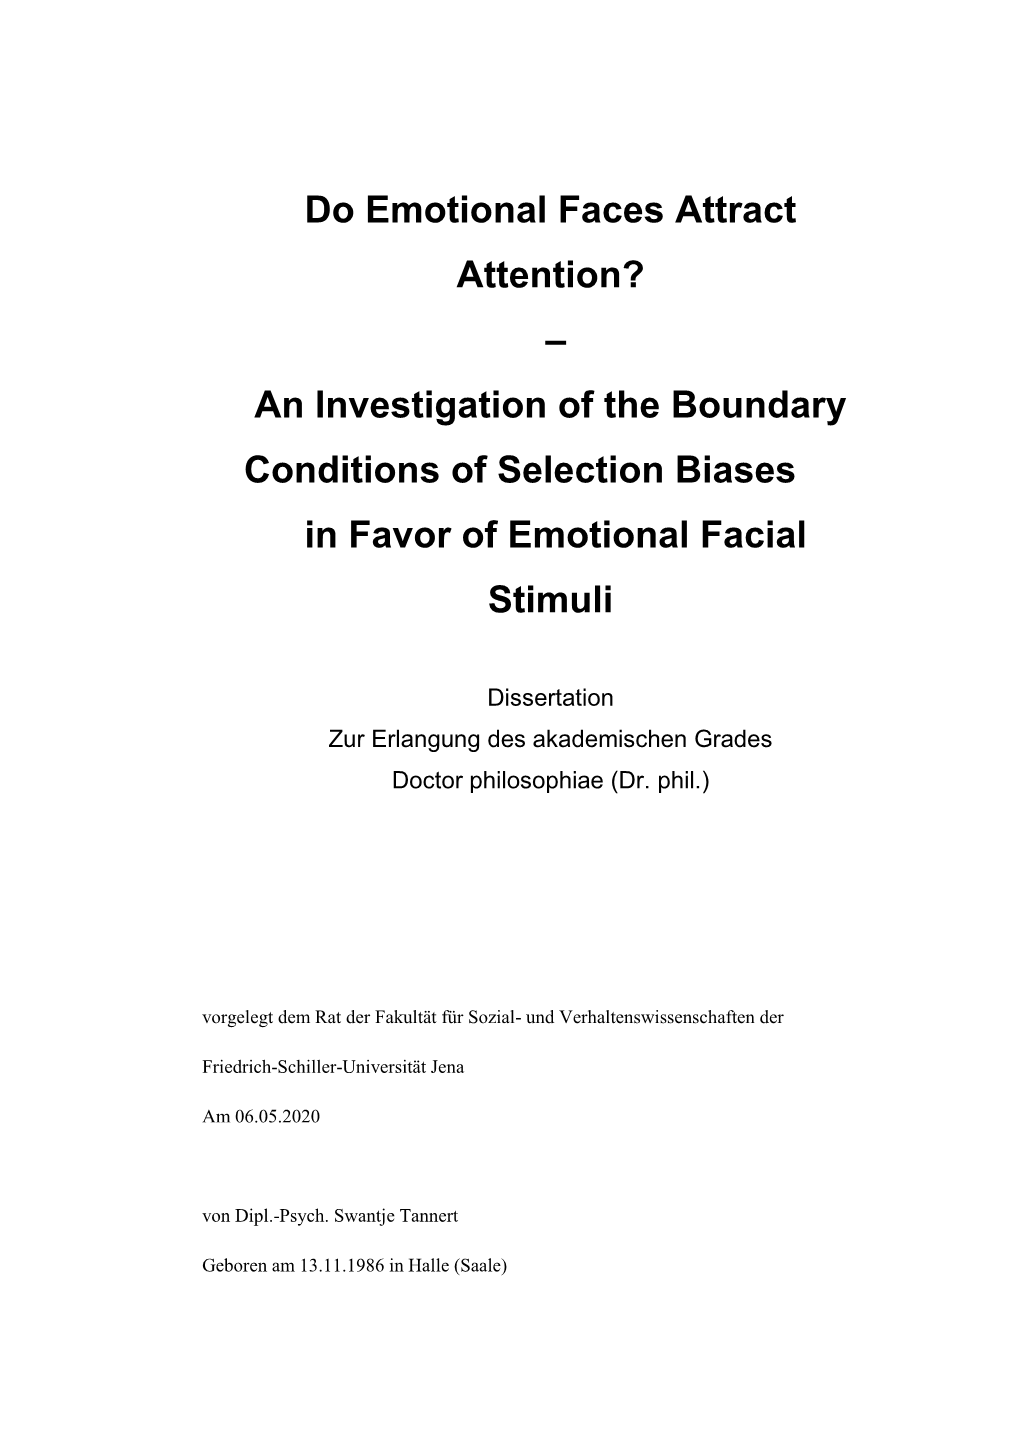 Do Emotional Faces Attract Attention? – an Investigation of the Boundary Conditions of Selection Biases in Favor of Emotional Facial Stimuli